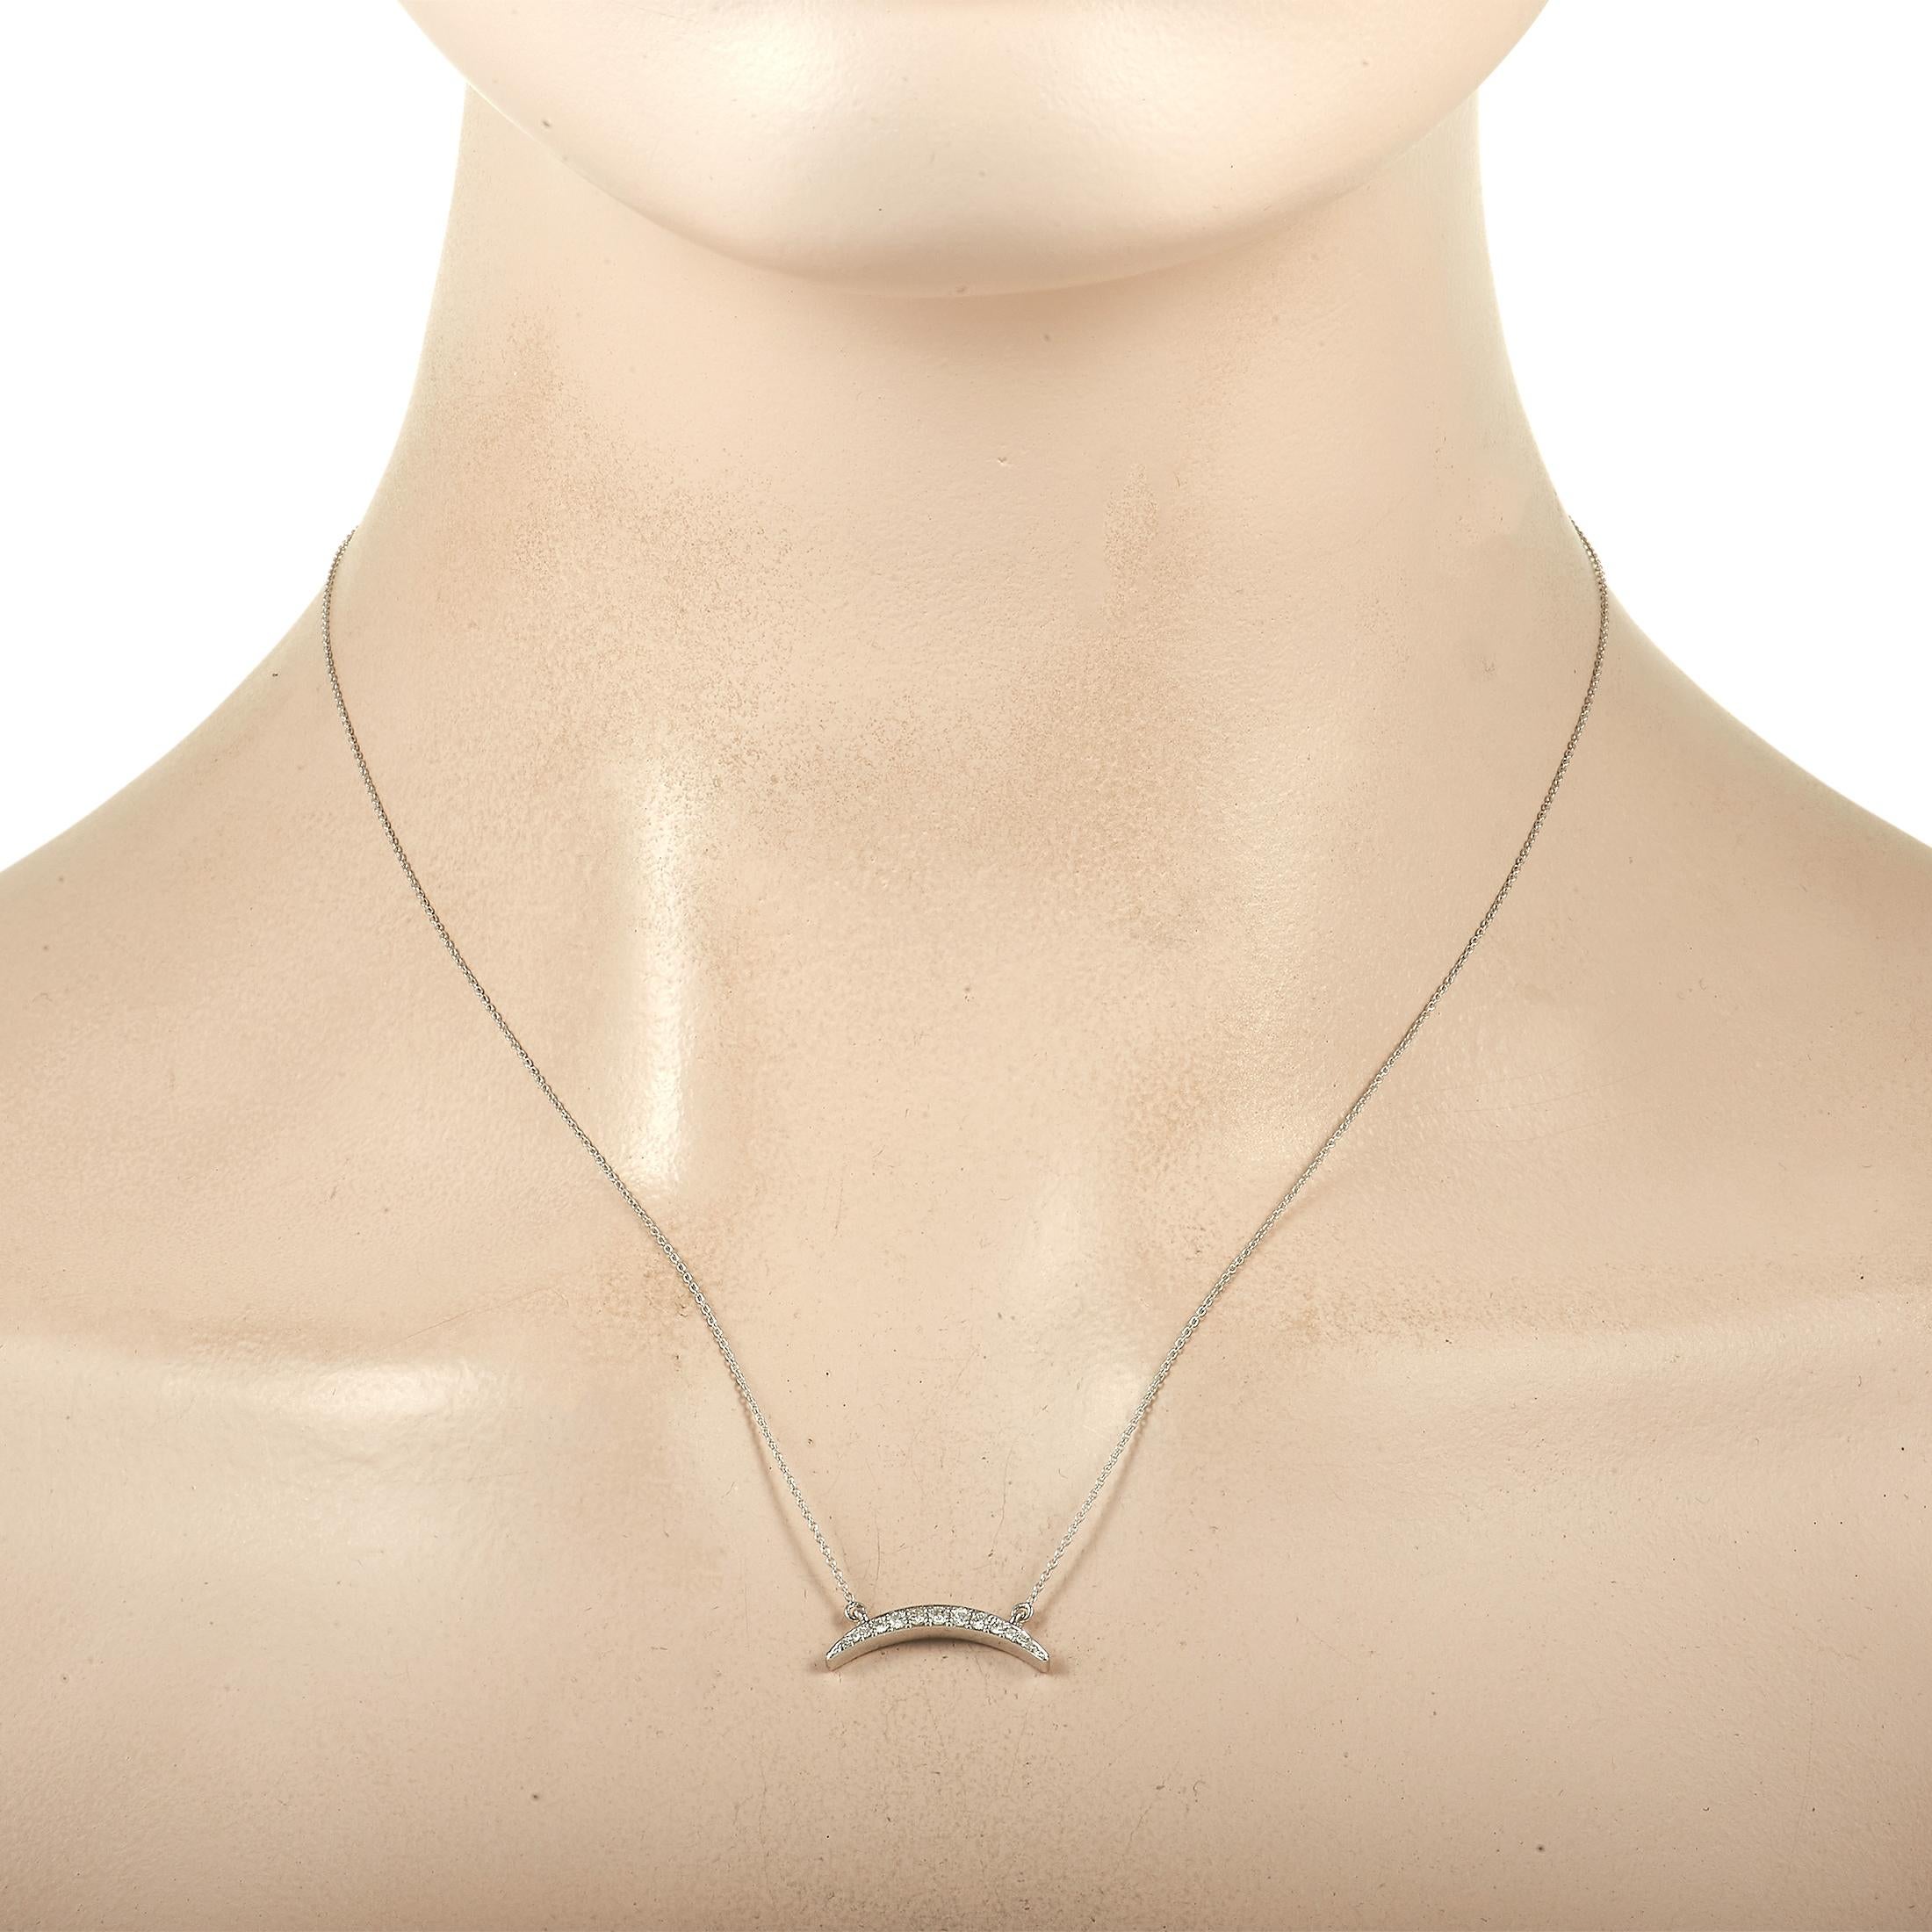 This minimalist pendant necklace is chic and sophisticated. This piece’s crescent-shaped pendant measures 0.75” long, 0.07” wide, and is covered in diamonds with a total weight of 0.16 carats. Crafted from 14K White Gold, it’s suspended in the